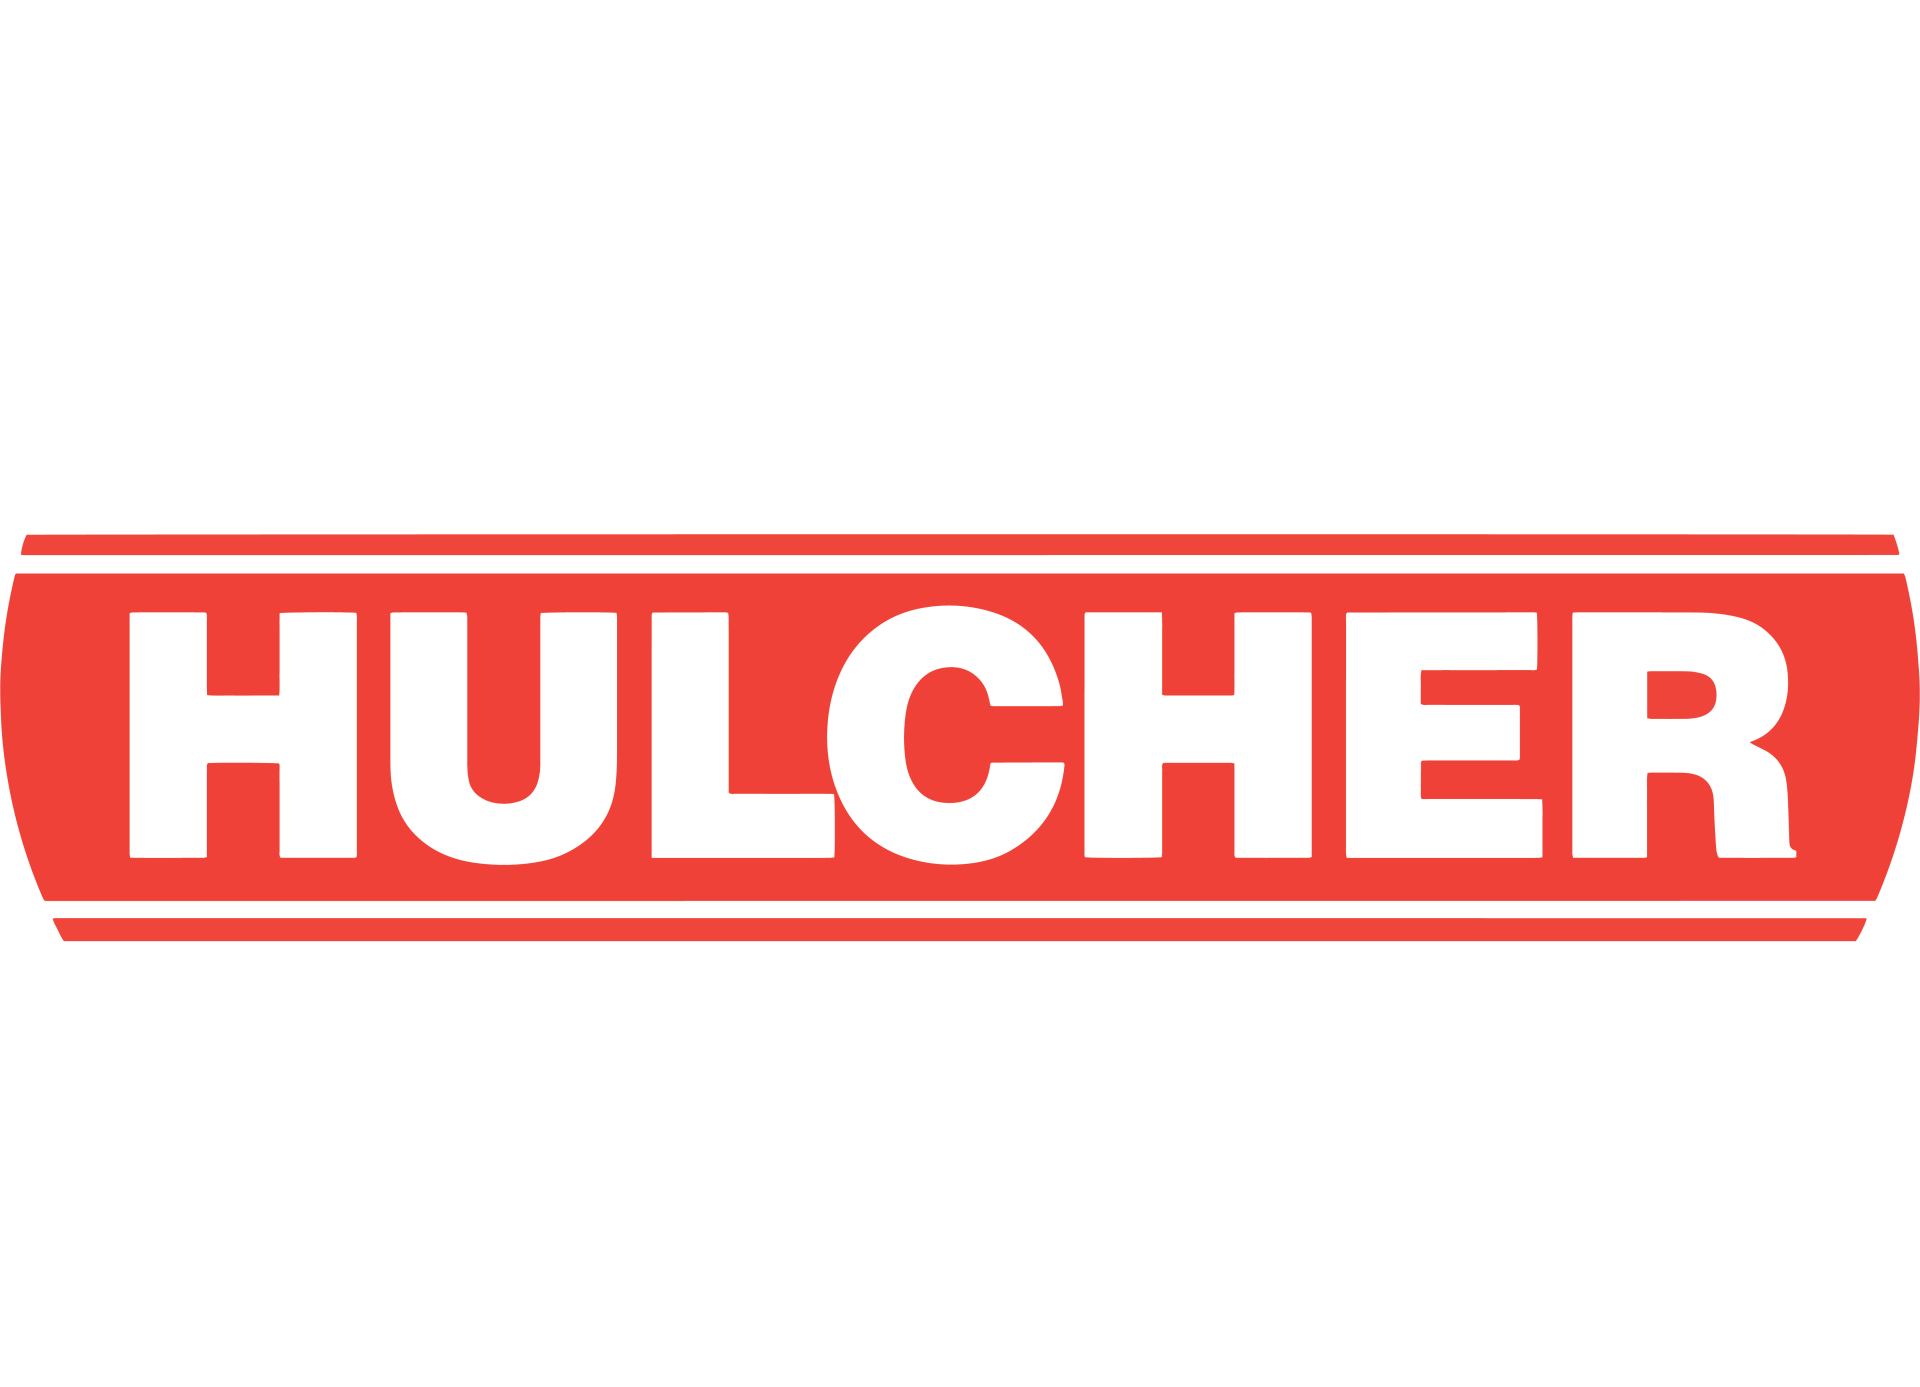 Hulcher Services Inc. Customer Service for Over 50 Years  Railroad Contractor Services